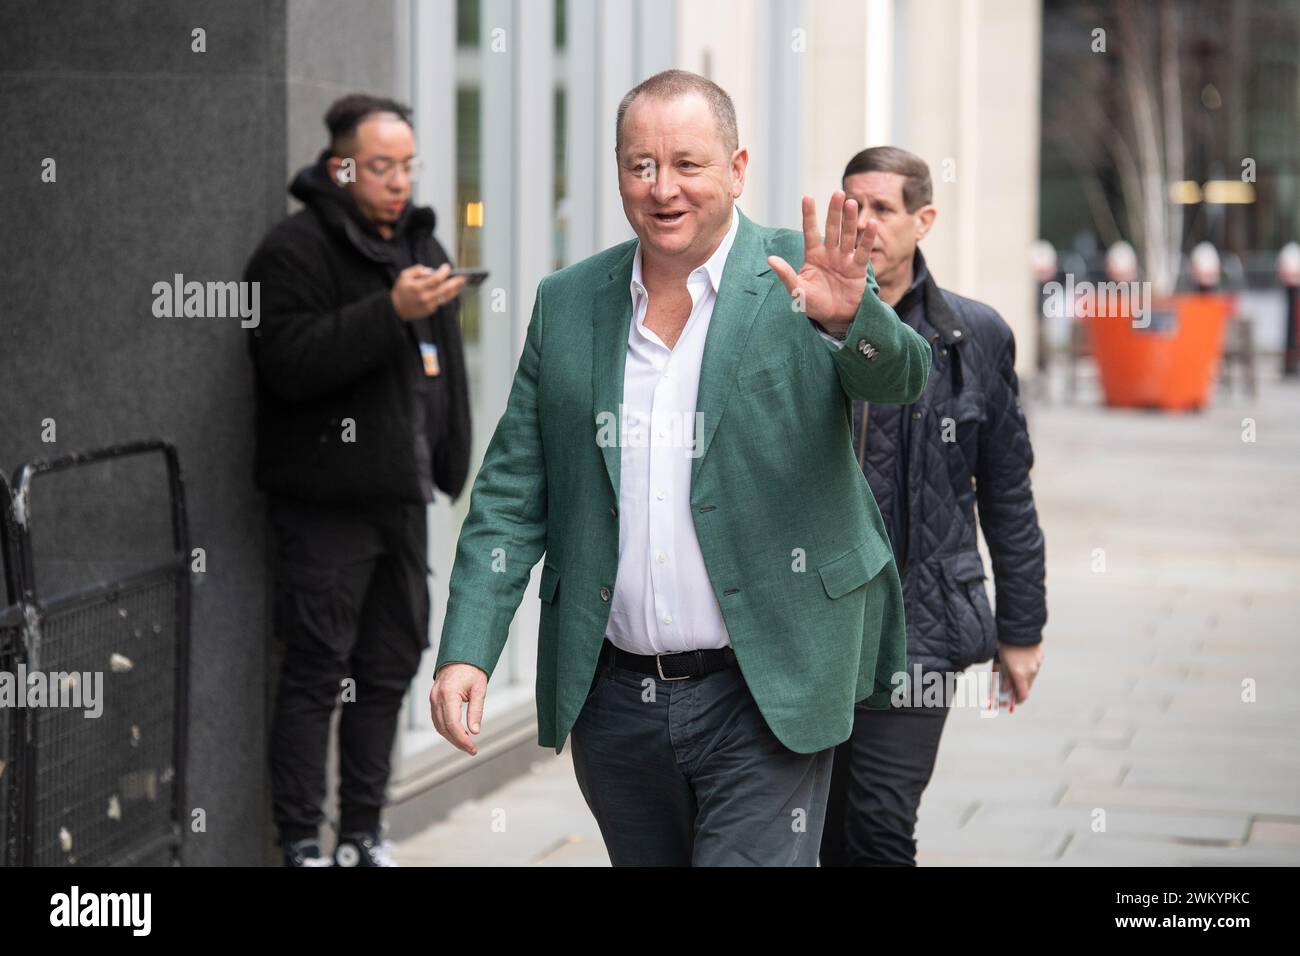 London, UK. 23 Feb 2024. Mike Ashley - Frasers Group Board Member (and former CEO) arrives at Rolls Building where his company Frasers Group is taking legal action against investment bank Morgan Stanley over the bank's attempts to force Frasers Group to abandon bets on the share price of Hugo Boss in 2021. . Credit: Justin Ng/Alamy Live News. Stock Photo